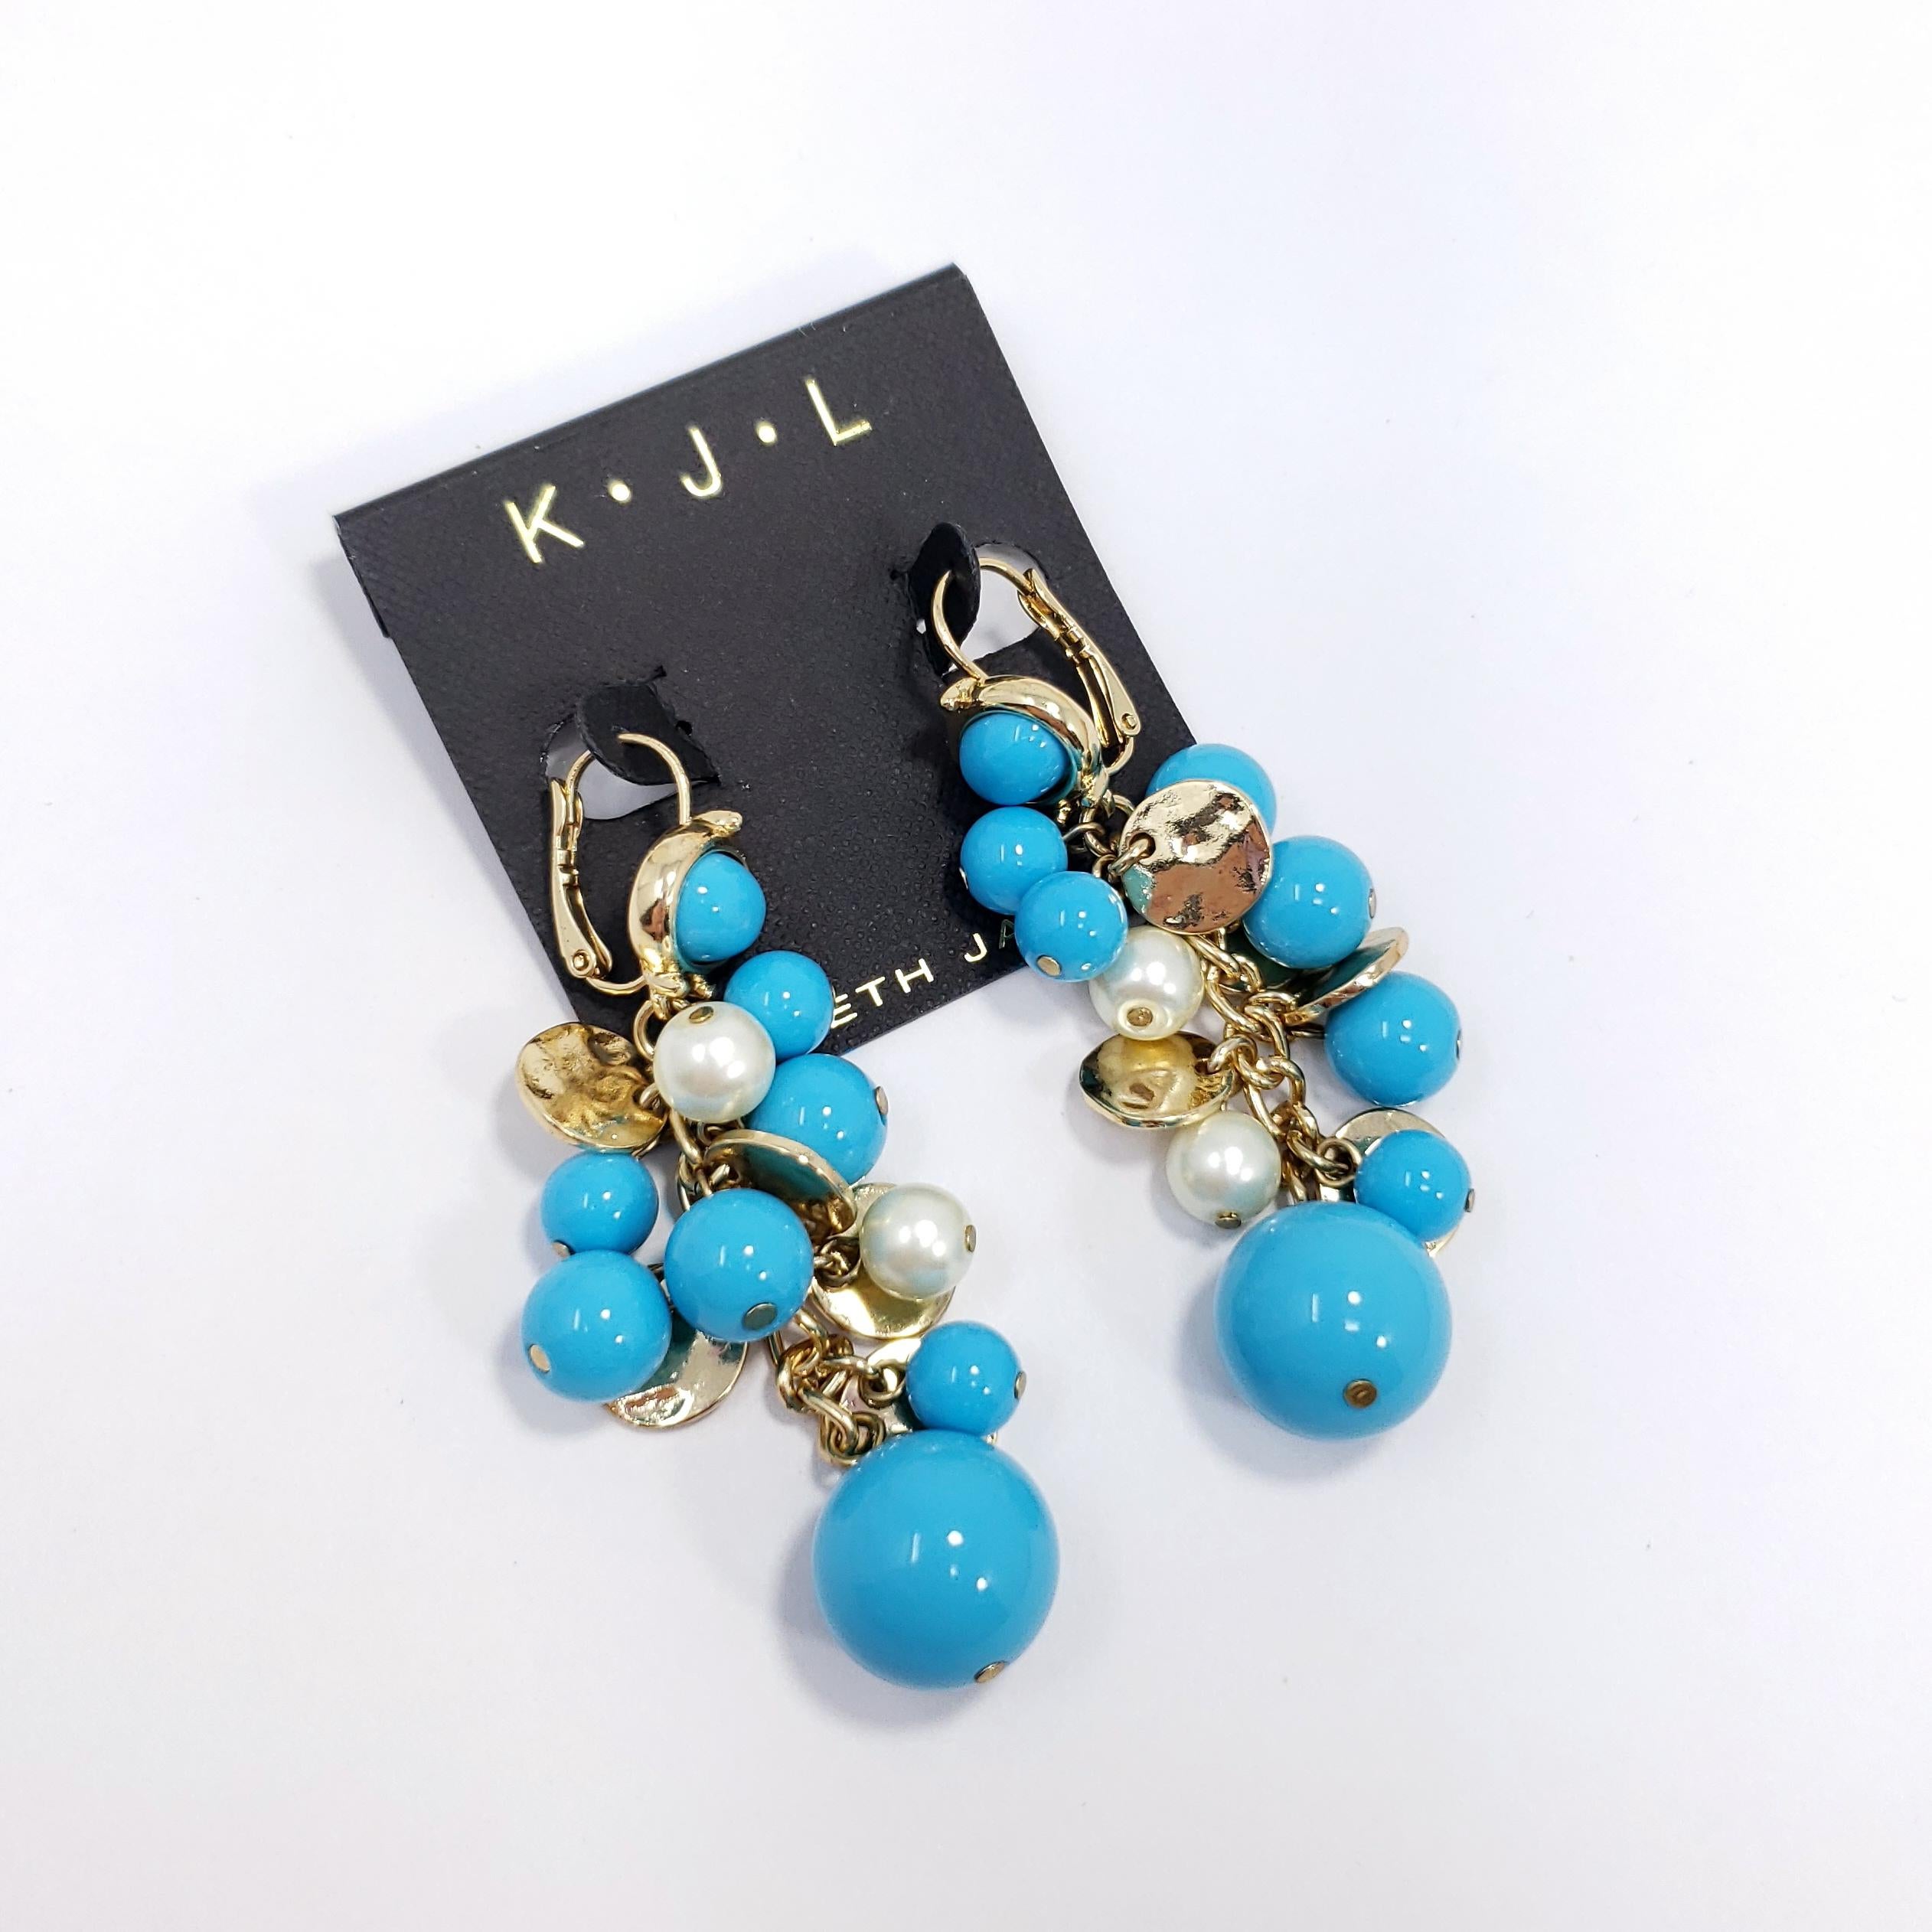 Stylish pair of cluster earrings by Kenneth Jay Lane. Add some glamour to any style with these gold-plated earrings decorated with faux turquoise and pearl beads.

Hallmarks: Kenneth Lane